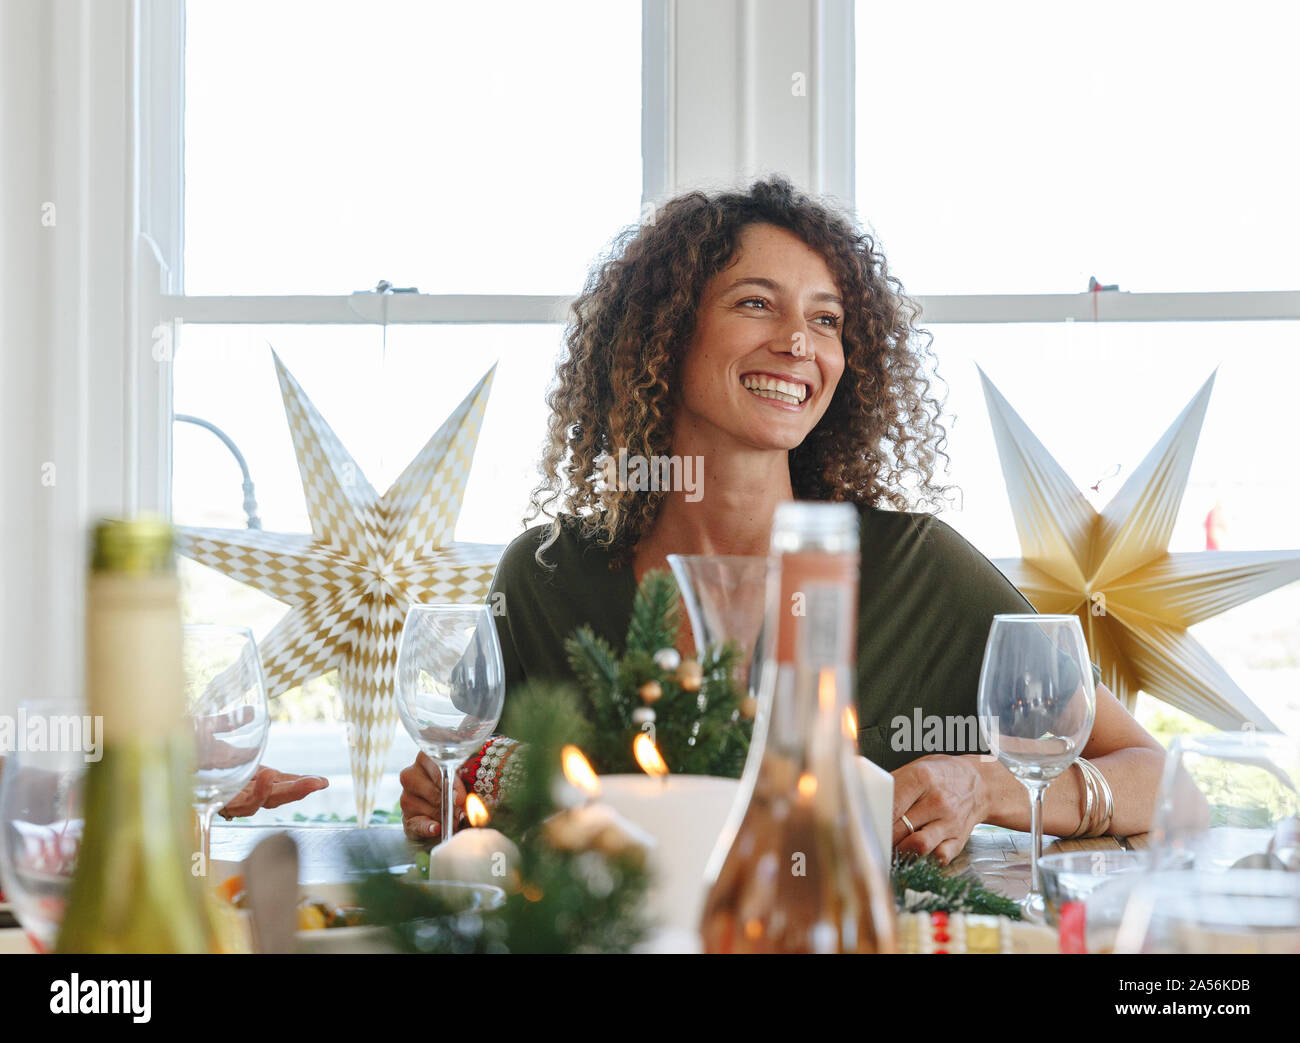 Woman dining at home party Stock Photo